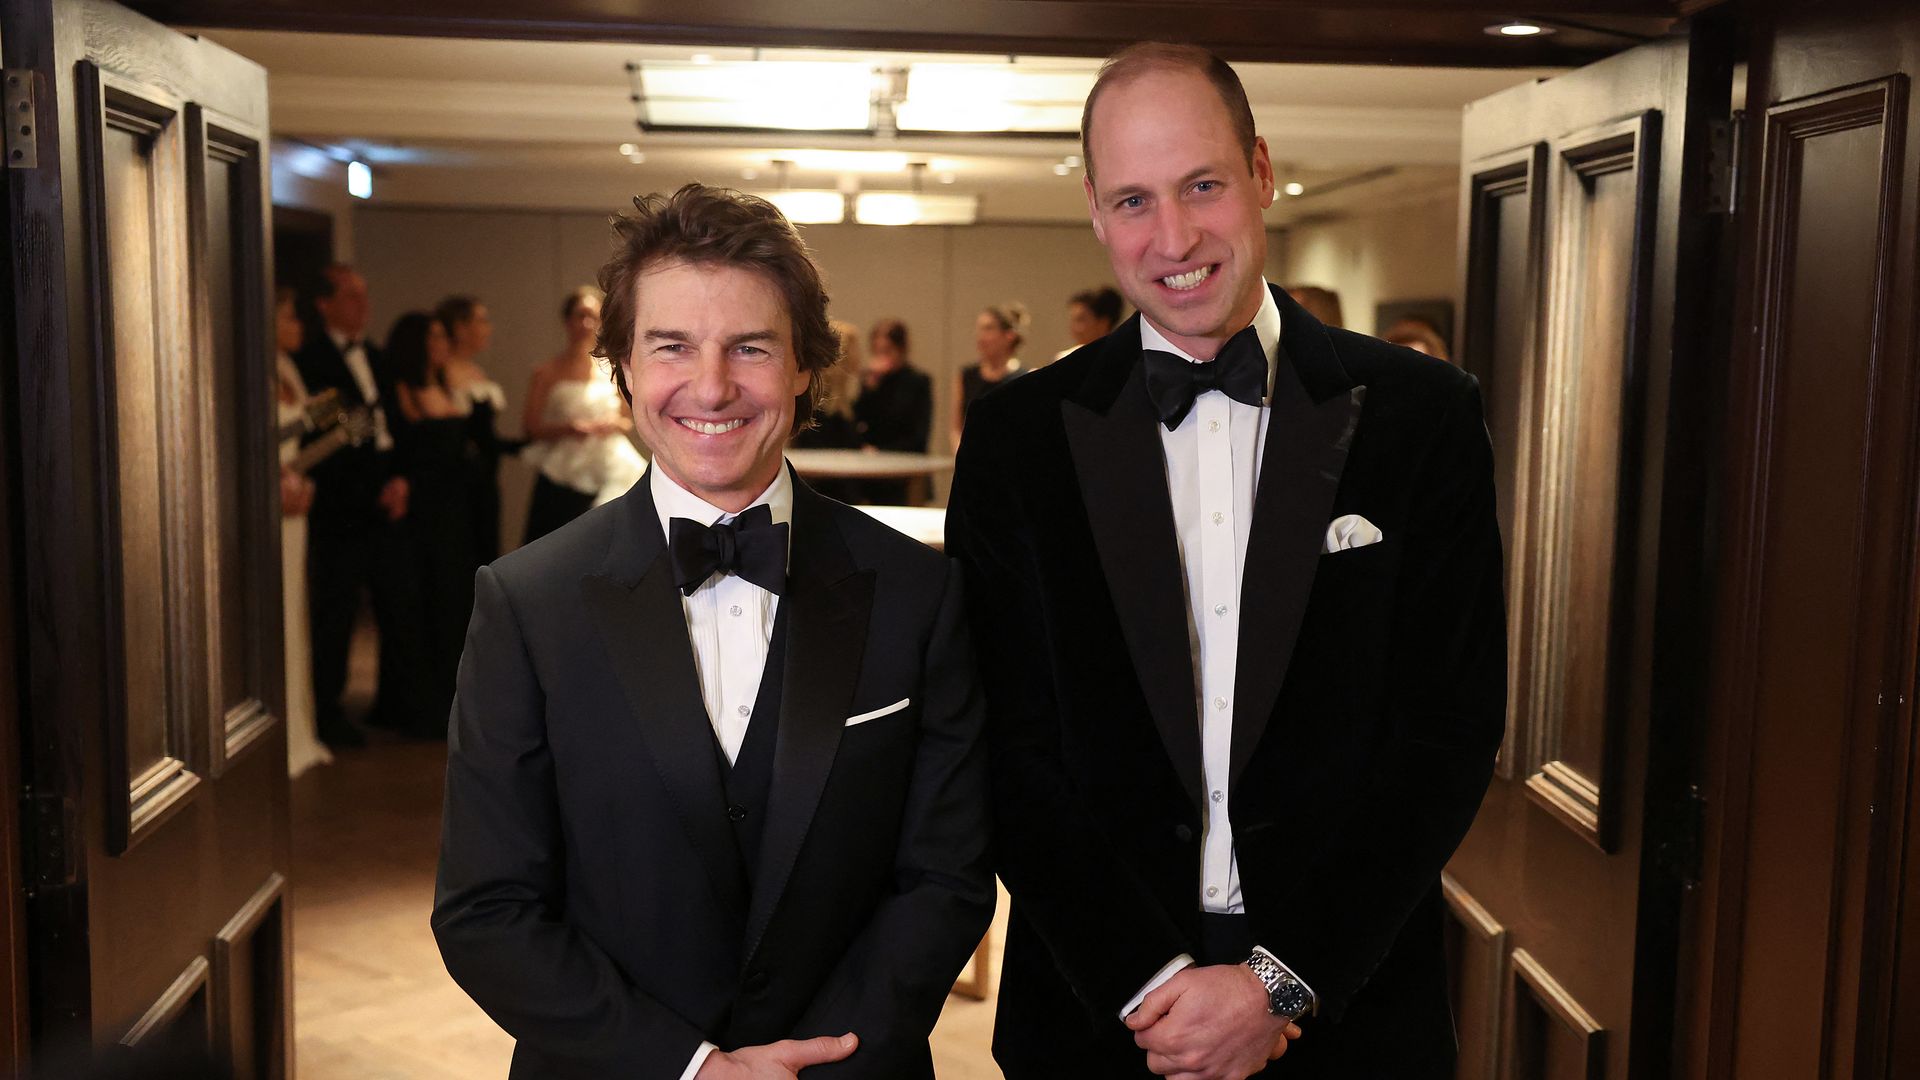 Britain's Prince William, Prince of Wales poses for a photo with US actor Tom Cruise at the London Air Ambulance Charity Gala Dinner at The OWO in central London, on February 7, 2024. (Photo by Daniel LEAL / POOL / AFP) (Photo by DANIEL LEAL/POOL/AFP via Getty Images)